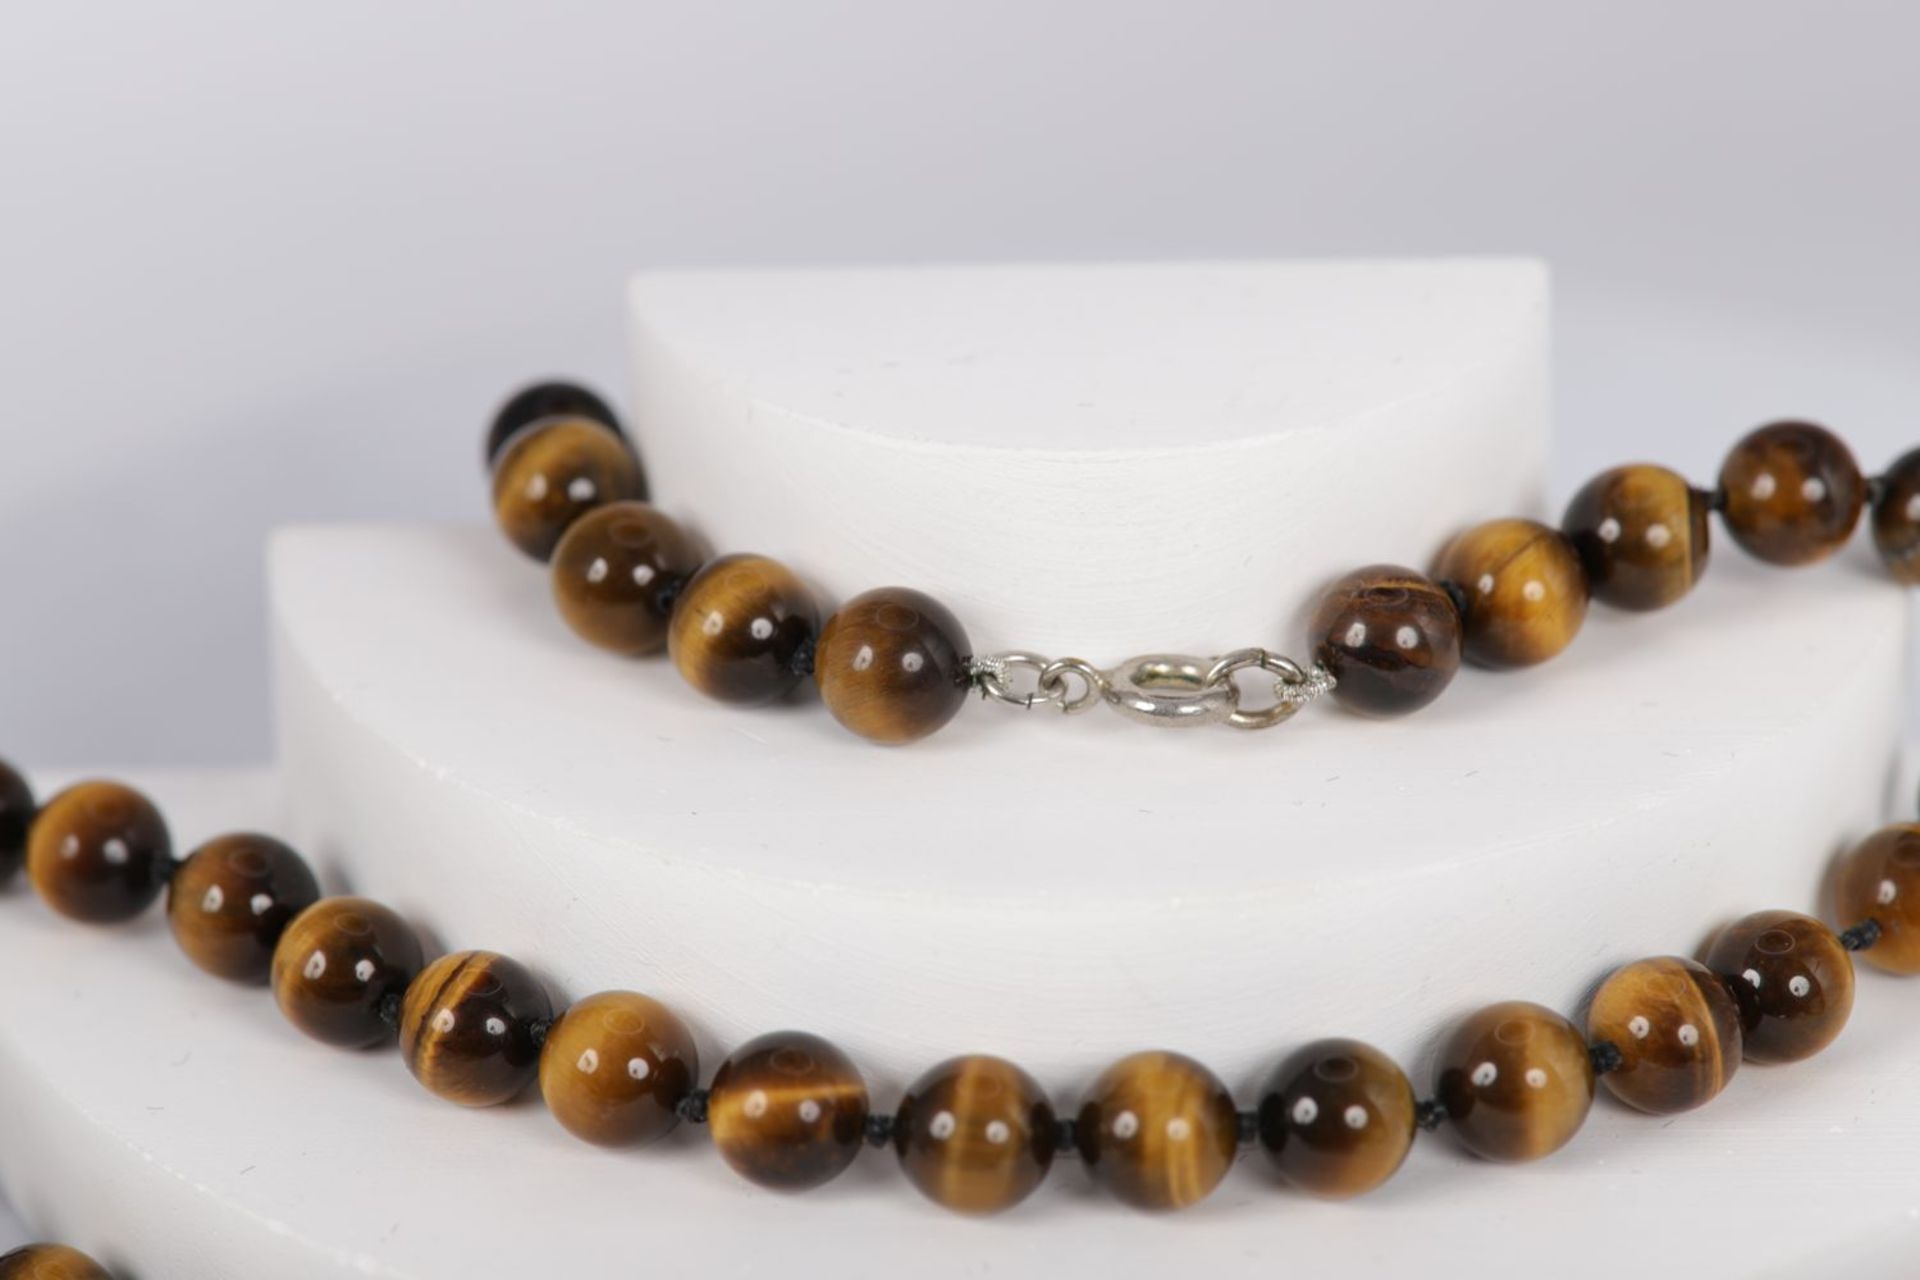 TIGER'S EYE BEAD NECKLACE - Image 2 of 4